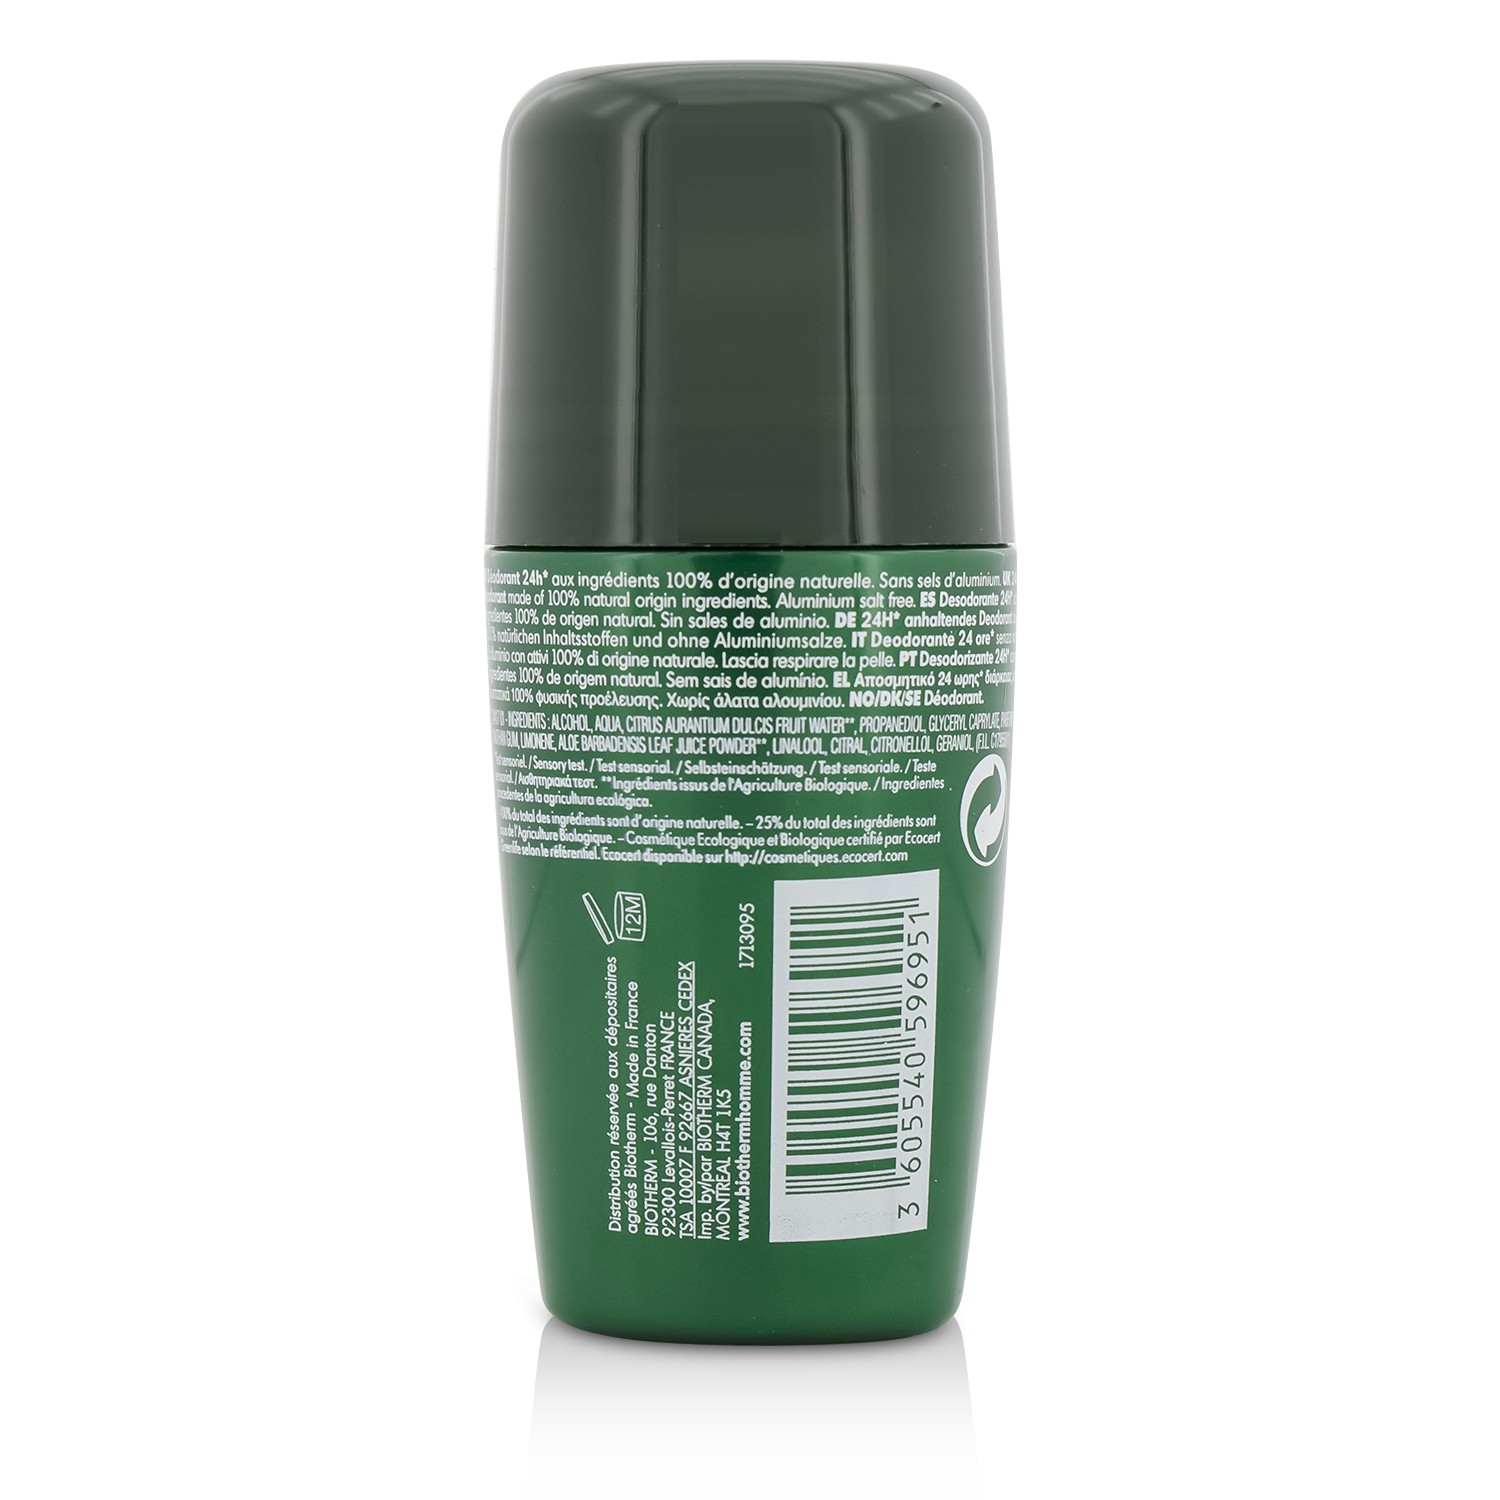 Biotherm Homme Day Control Natural Protection 24H Organic Certified Deodorant 75ml/2.53oz